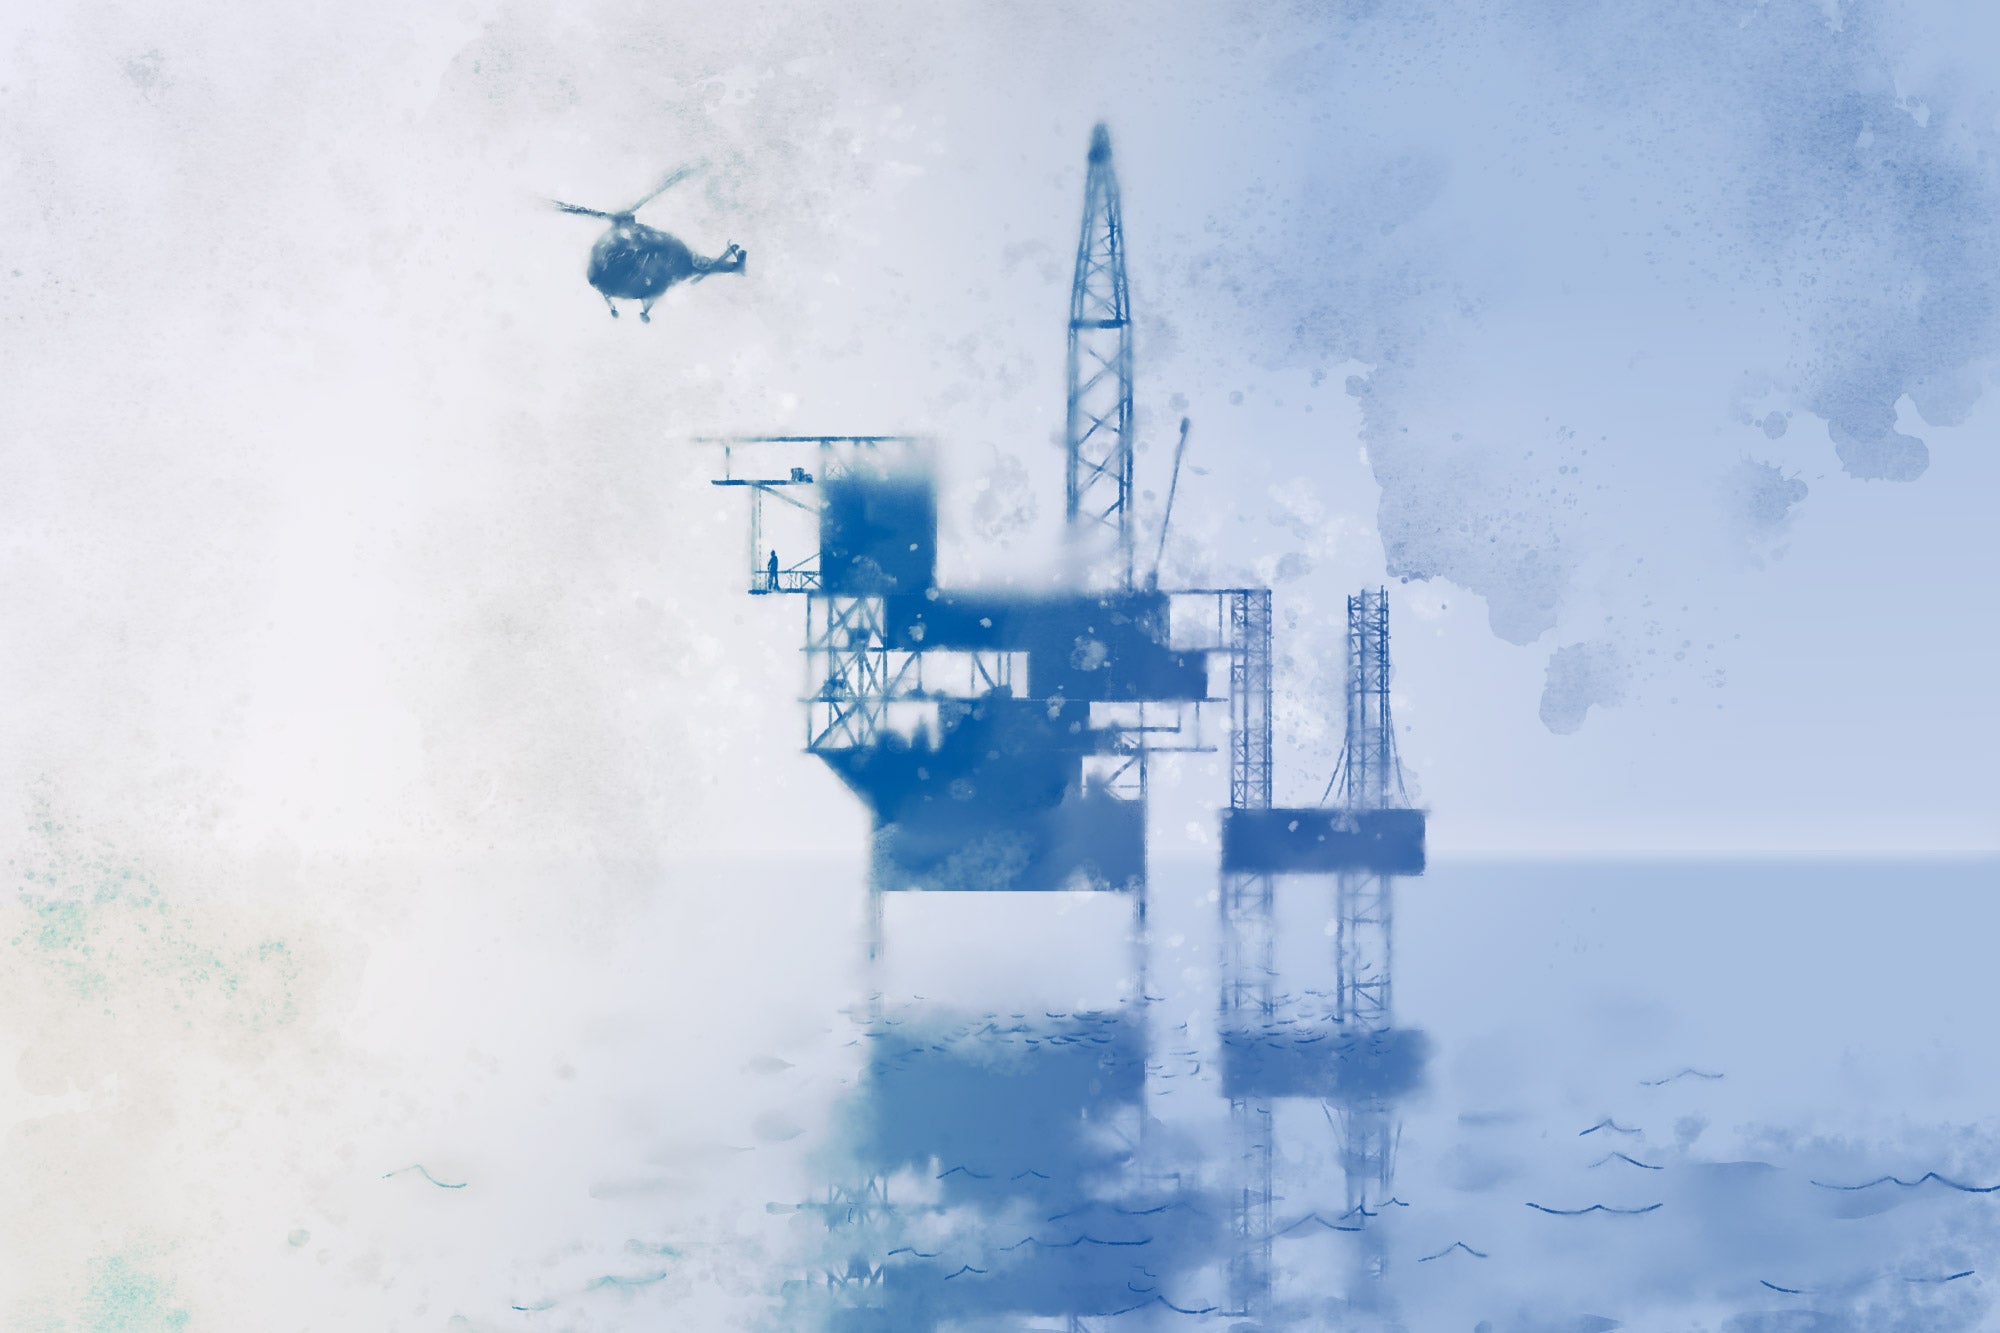 An illustration of a helicopter leaving an oil rig in a storm, seen through clouds and all in tones of blue. 